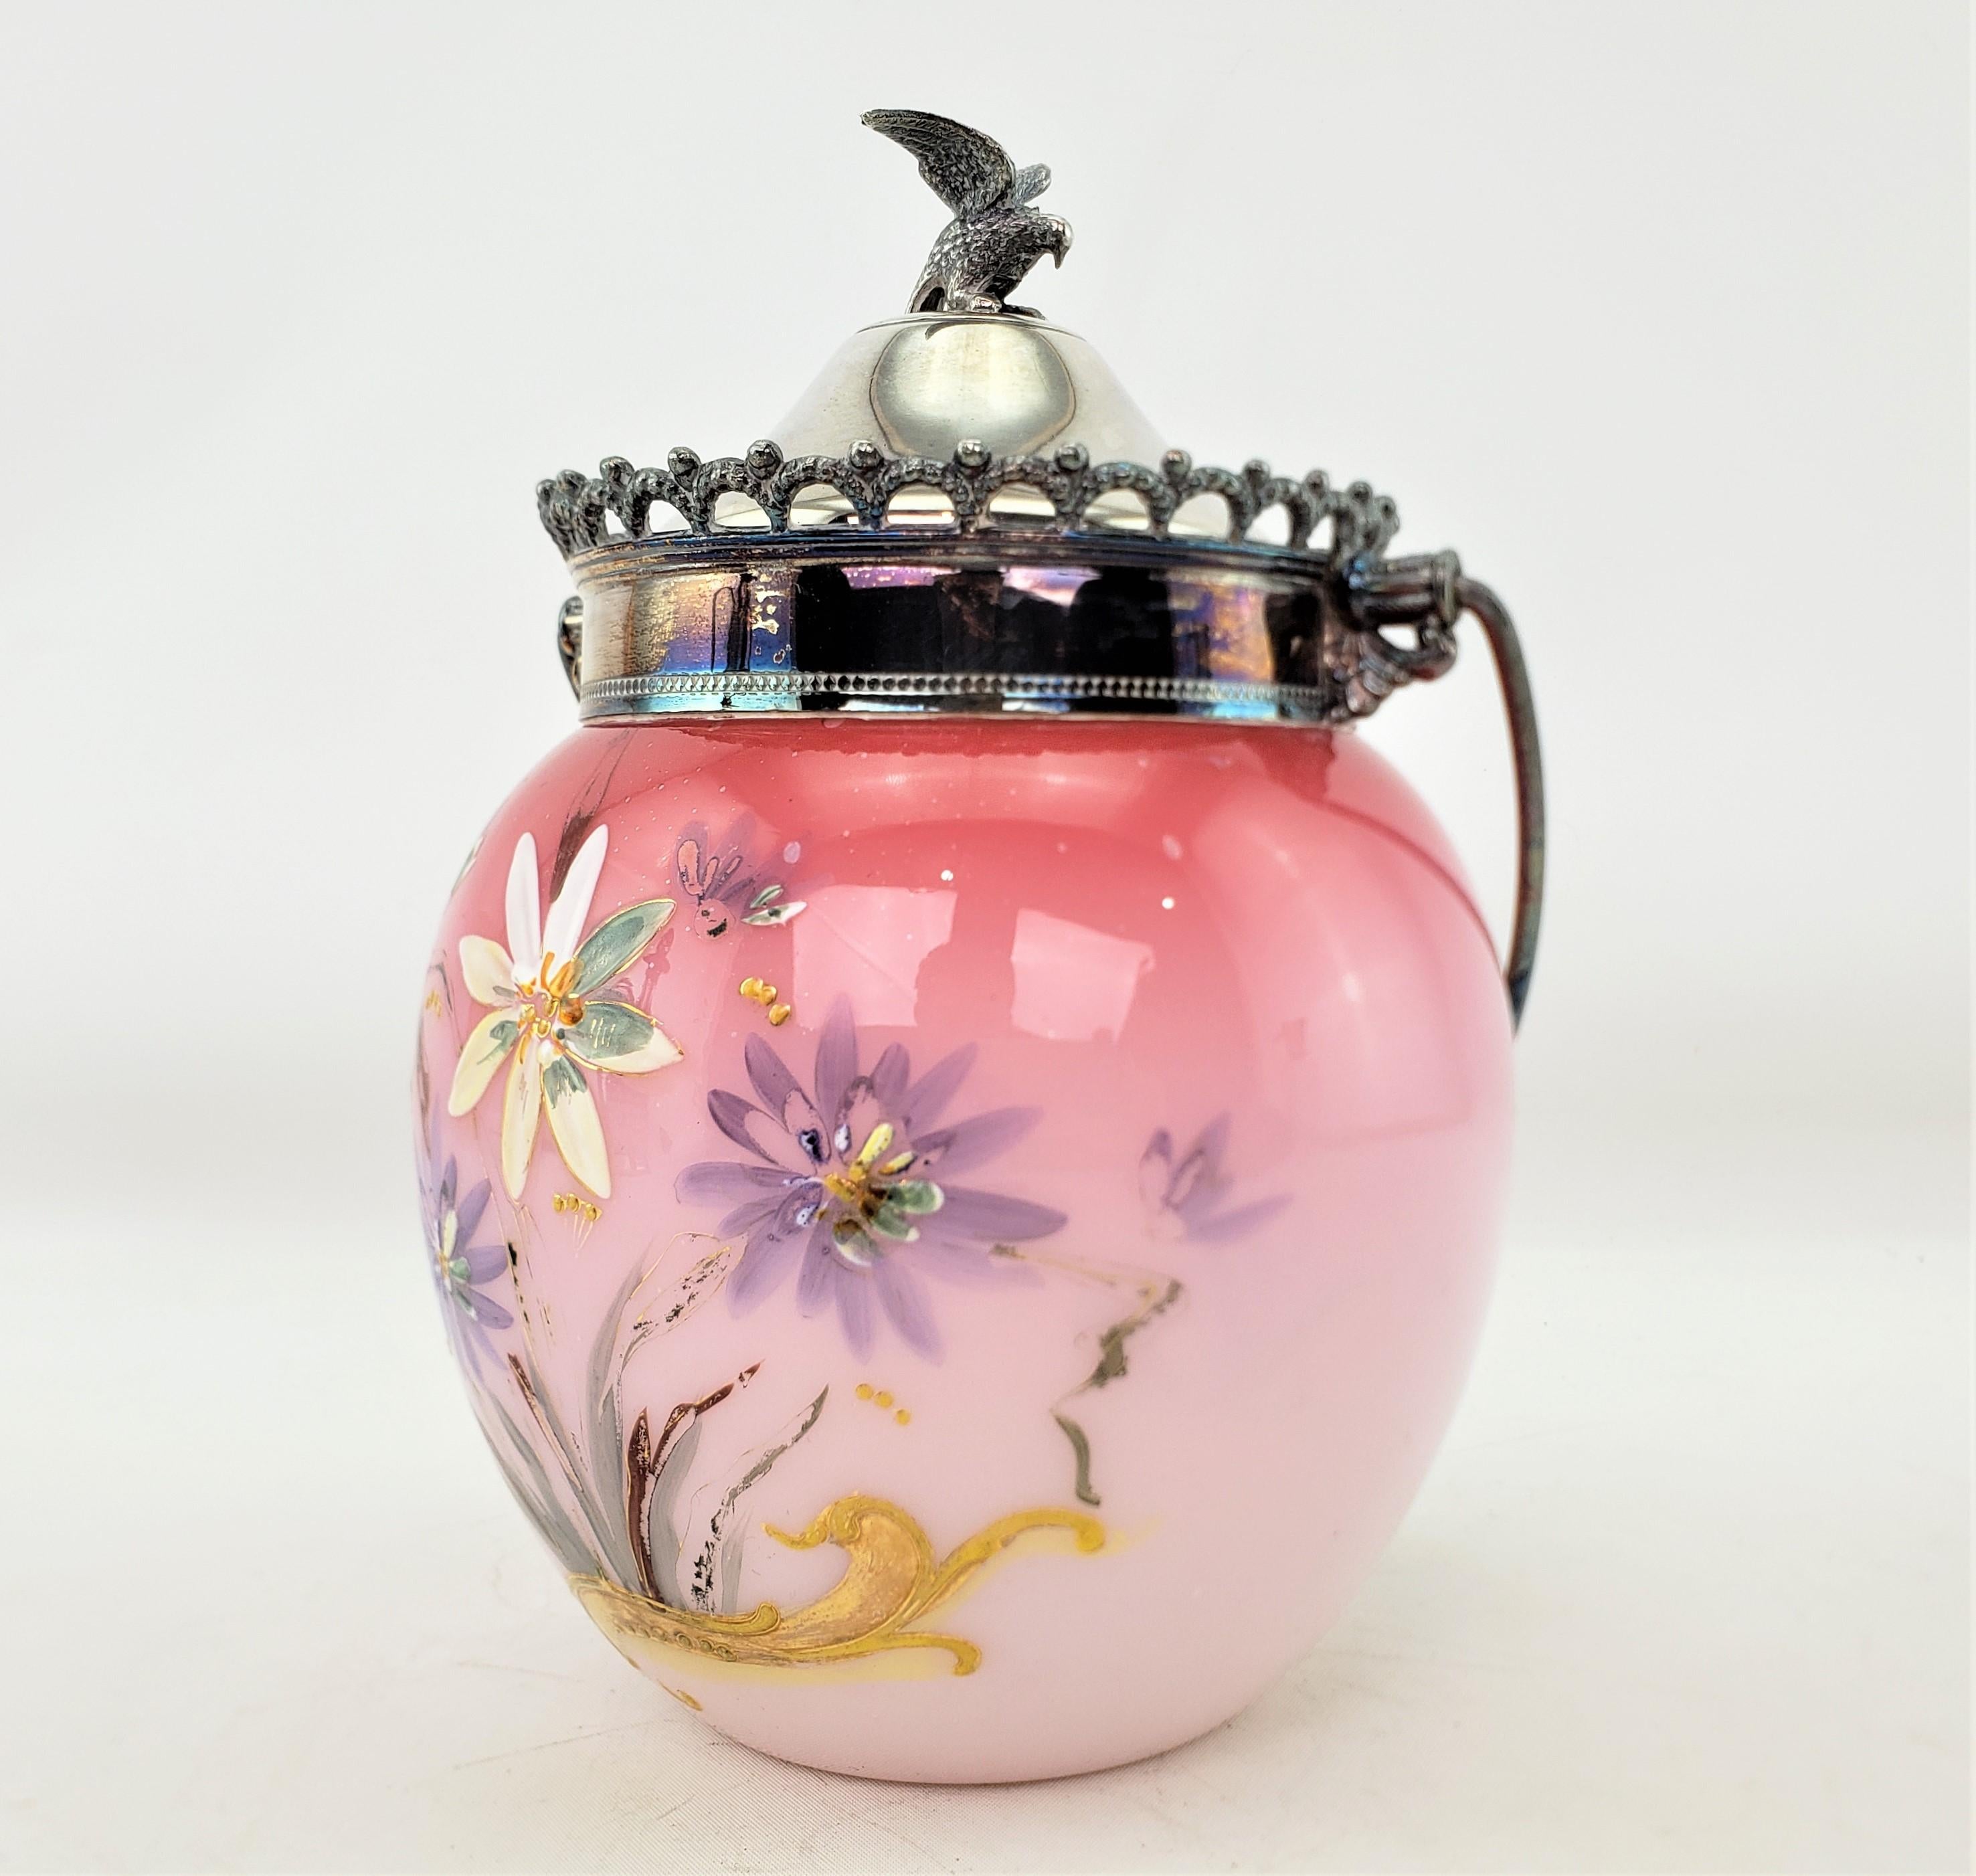 High Victorian Antique Cranberry and Silver Plated Biscuit Barrel with Hand Painted Flowers